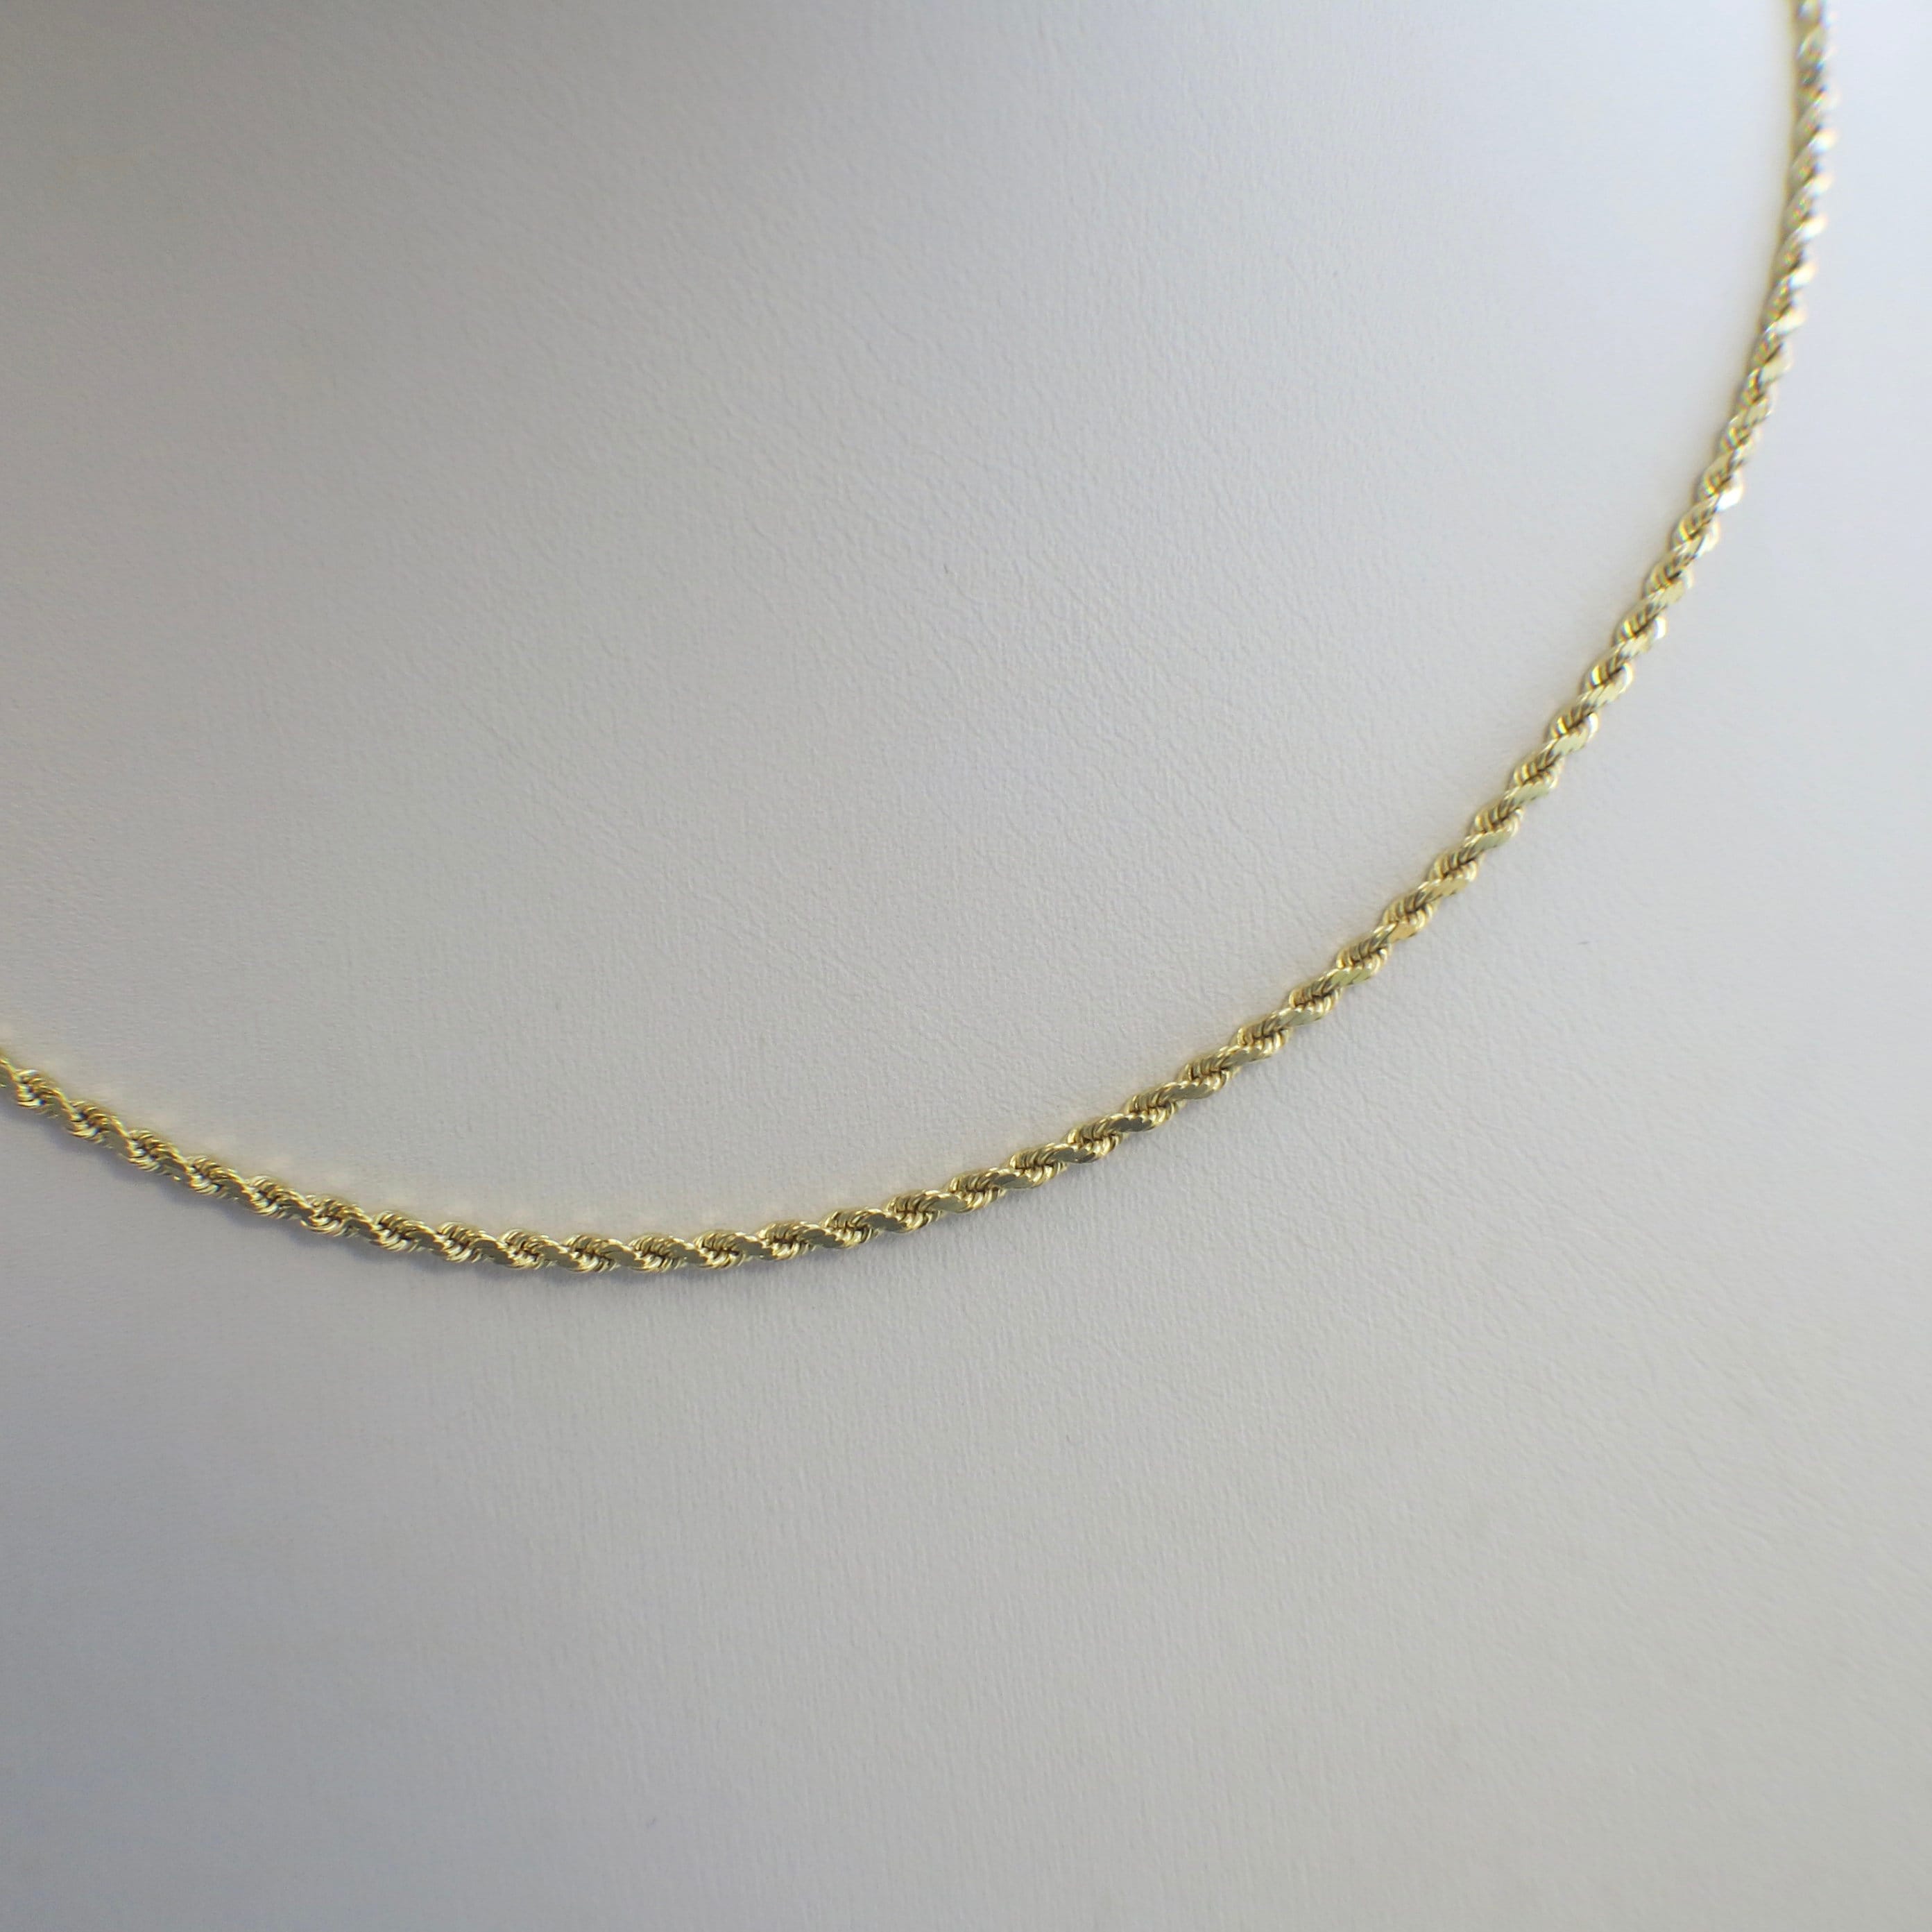 Buy 20 Inch 14K Yellow Gold Rope Chain Necklace Heavy Chain Online